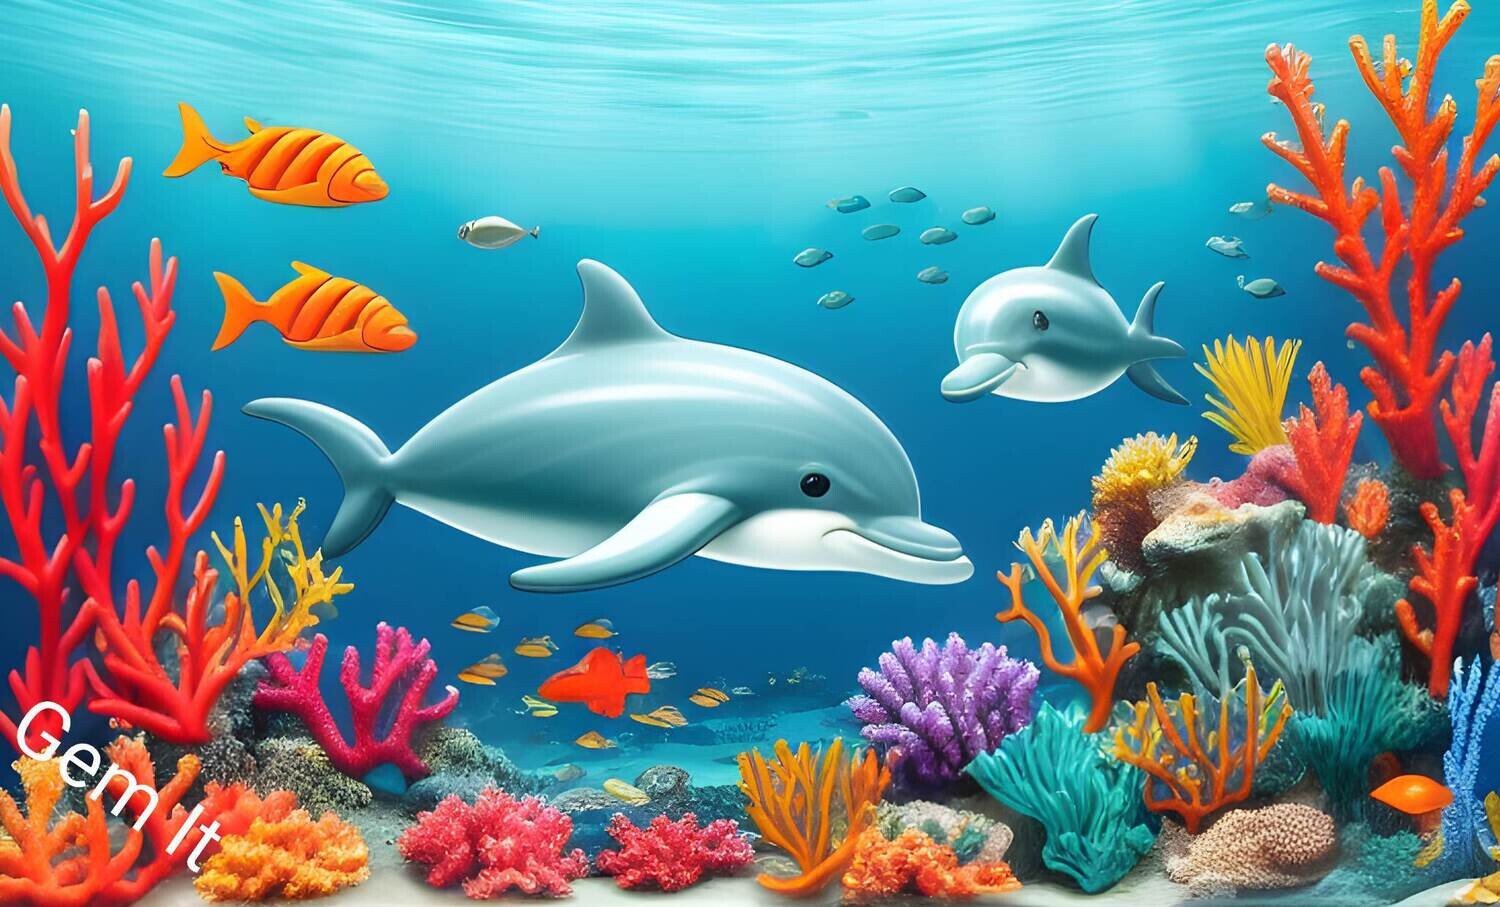 Dolphins under the sea - Specially ordered for you. Delivery is approximately 4 - 6 weeks.